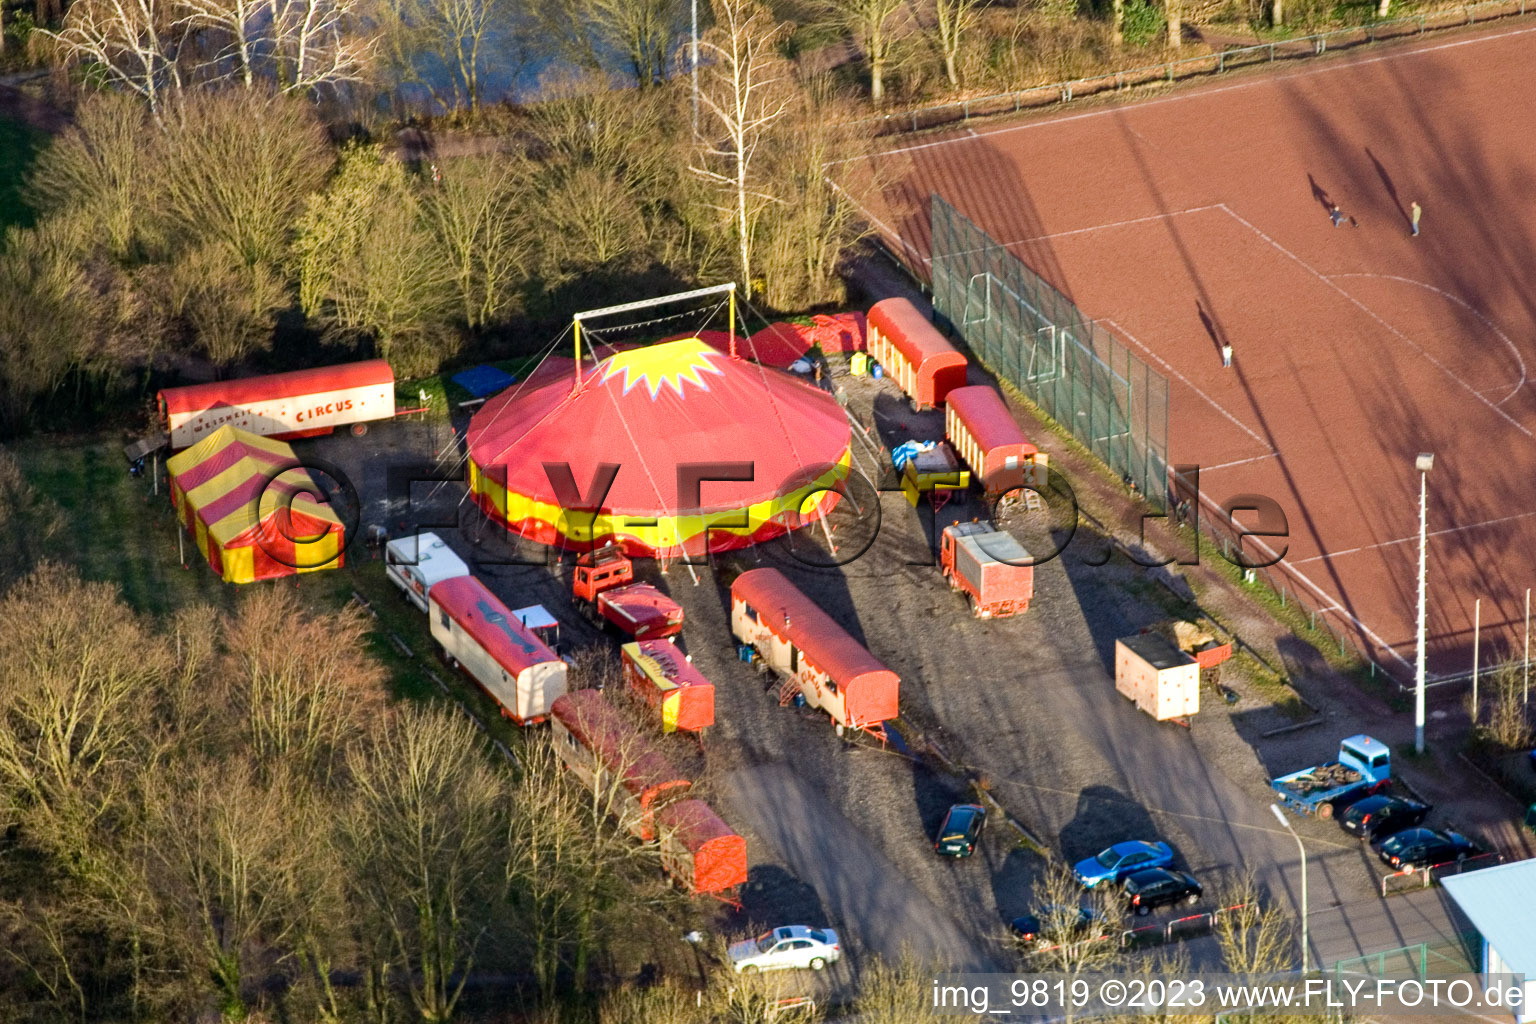 Oblique view of Circus wisdom at the sports field in Kandel in the state Rhineland-Palatinate, Germany